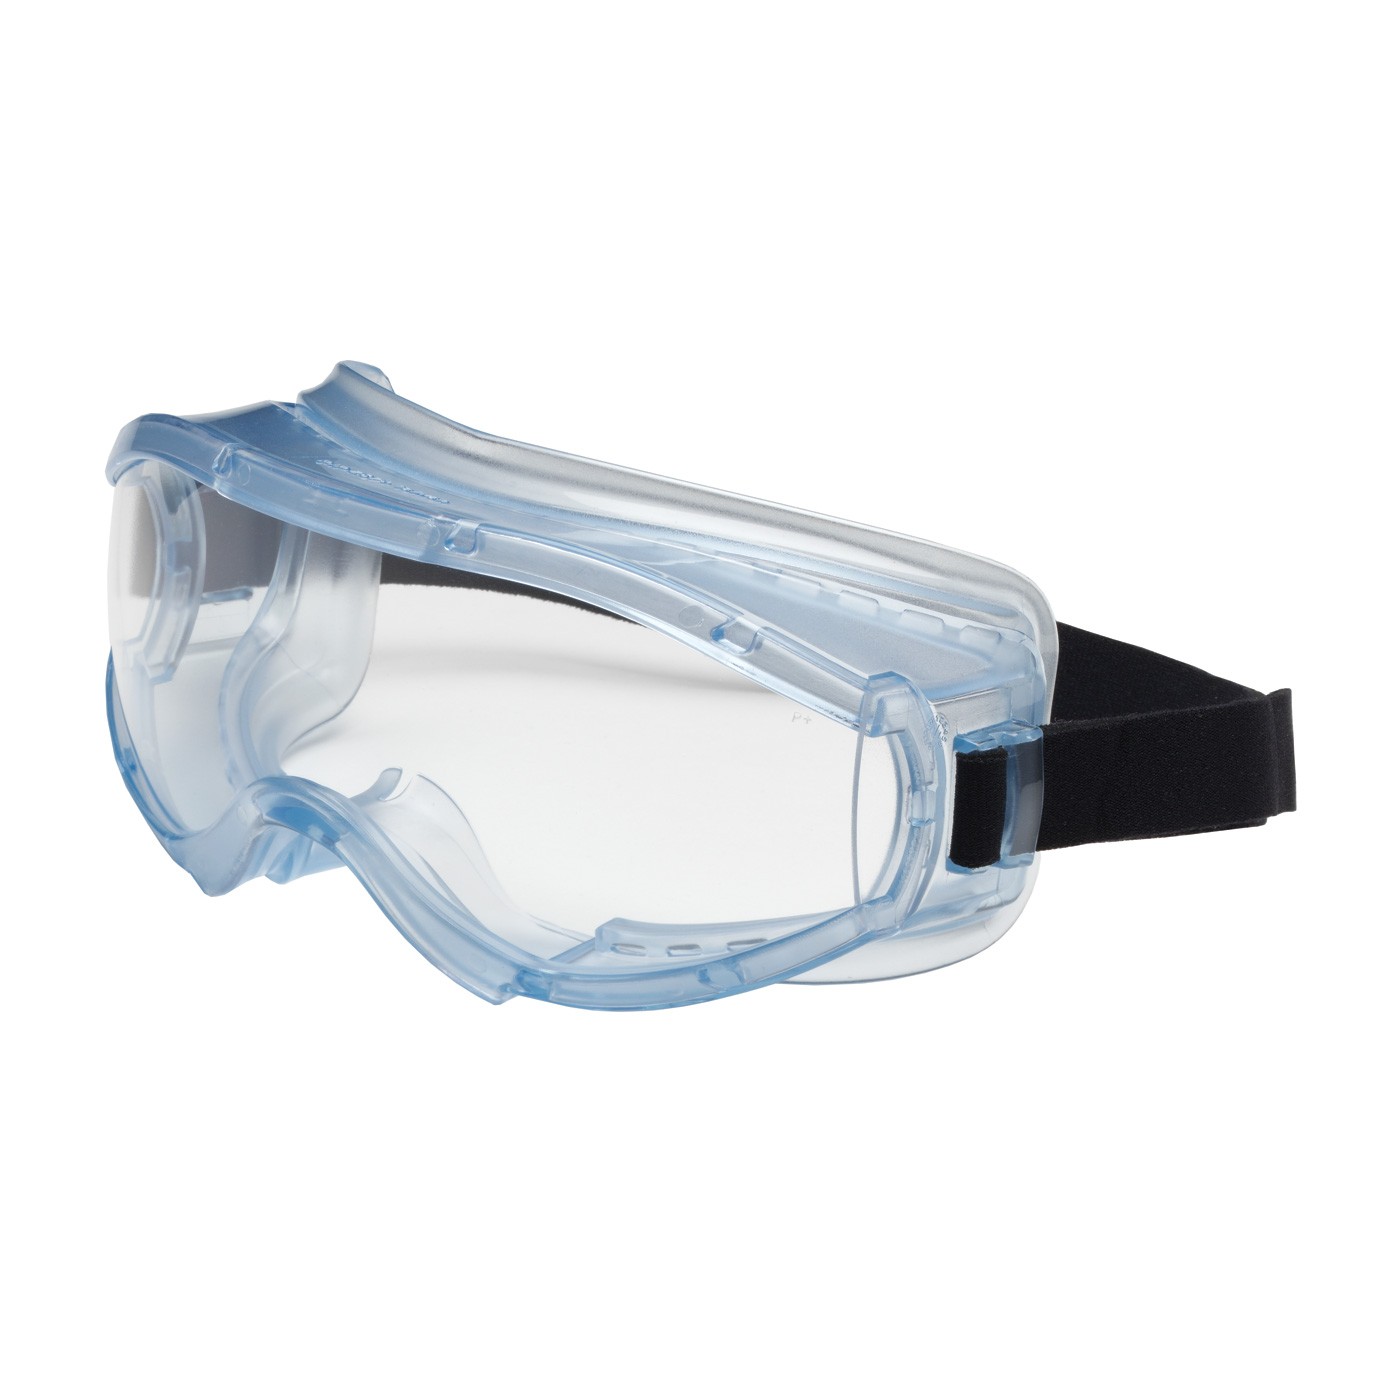 SALUS GOGGLE, INDIRECT VENT,CLEAR POLYCARBONATE LENS, ANTI-SCRATCH AND ANT